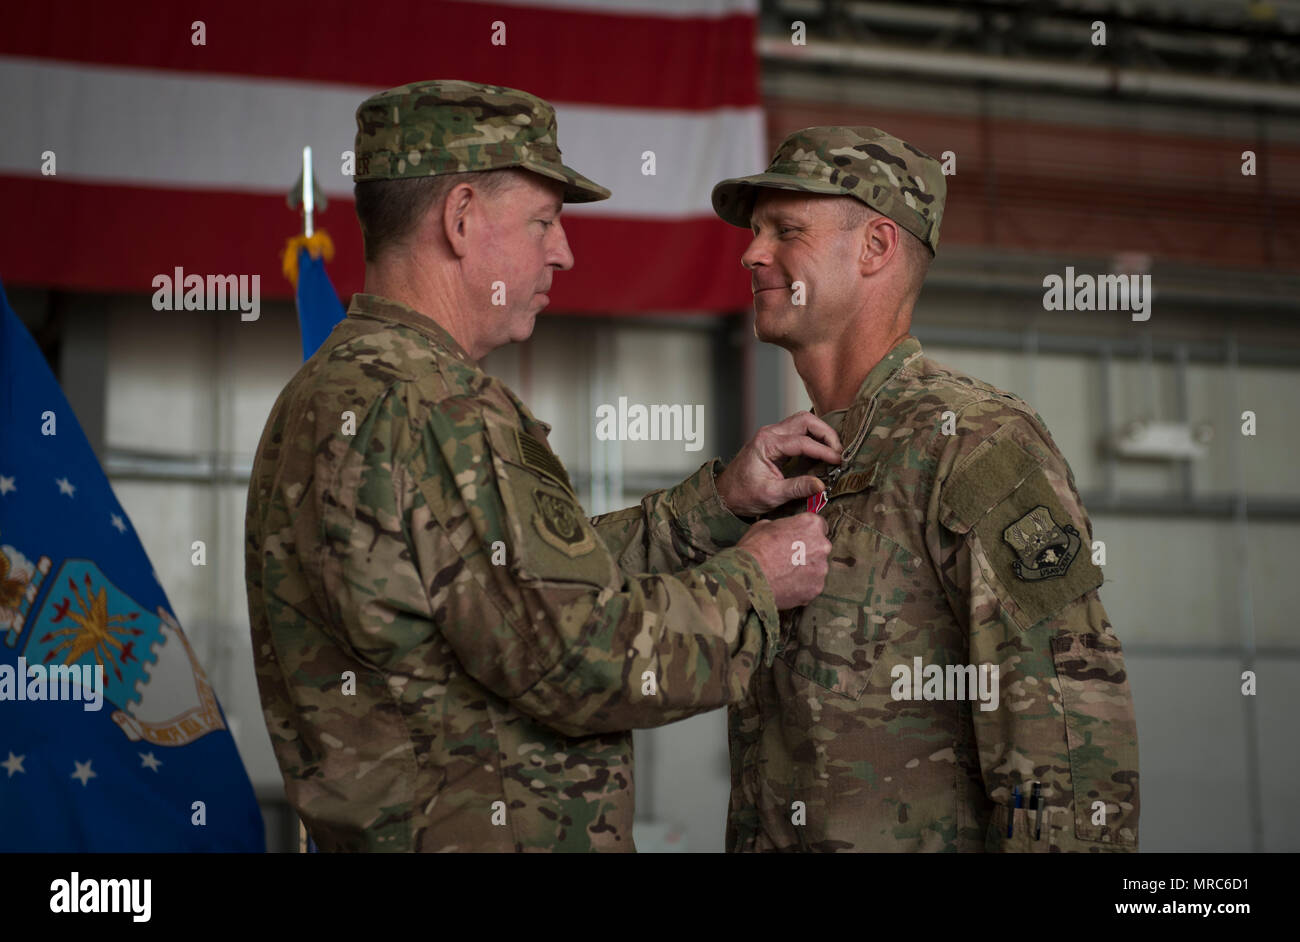 Brig. Gen. Jim Sears, the outgoing 455th Air Expeditionary Wing commander, receives the Bronze Star Medal from Maj. Gen. James Hecker, the 9th Air and Space Expeditionary Task Force-Afghanistan commander, during a change of command ceremony at Bagram Airfield, Afghanistan, June 3, 2017. Sears commanded the 455th AEW for the last 12 months. During his time at Bagram, Sears’ leadership enabled 15,800 combat sorties, accumulating to 102,877 combat hours, which resulted in more than 1,369 kinetic strike and 2,836 enemies killed in action. (U.S. Air Force photo by Staff Sgt. Benjamin Gonsier) Stock Photo